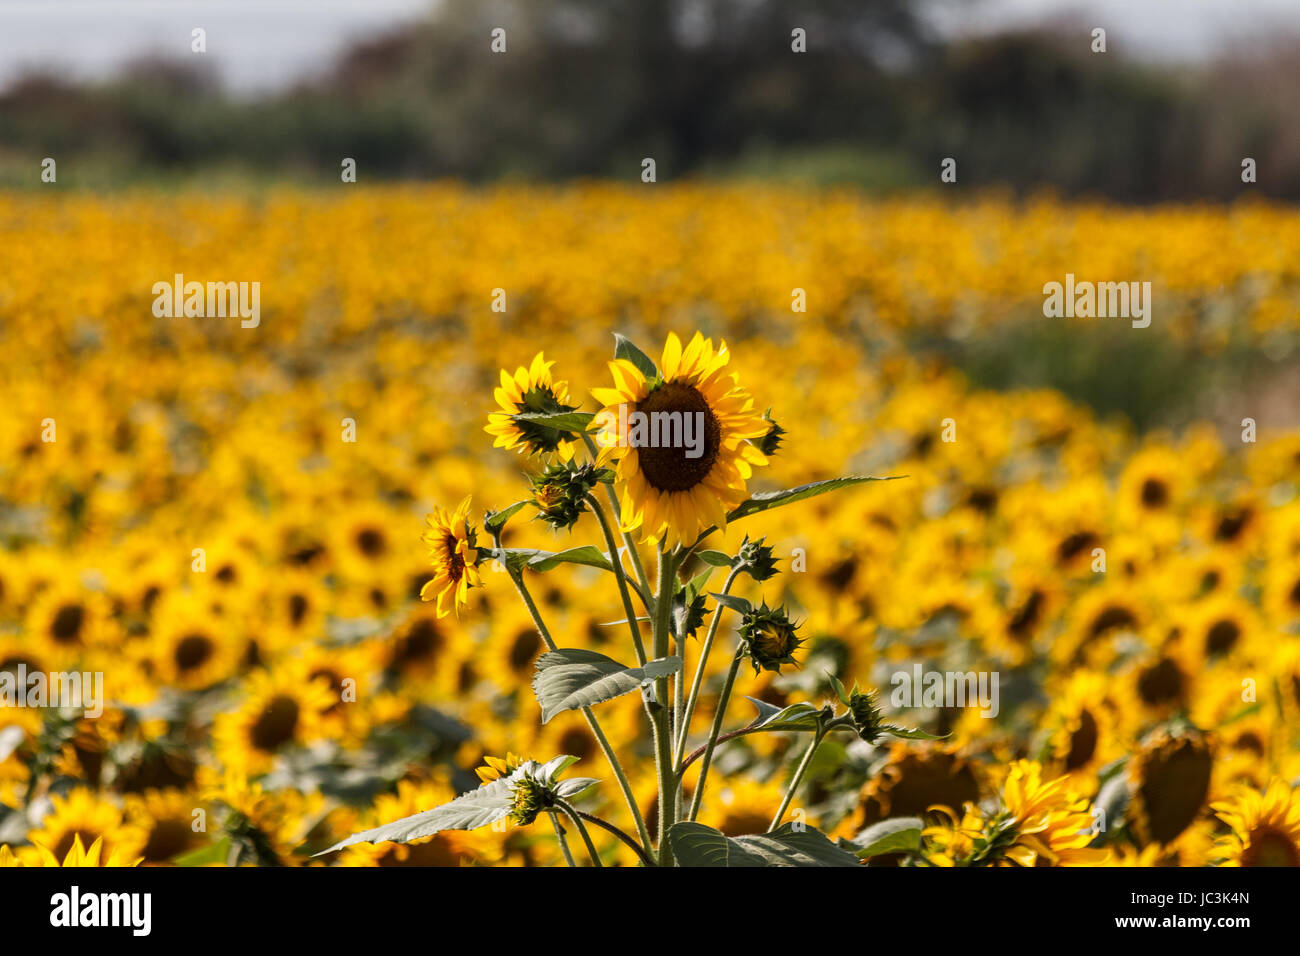 A field full of sunflower with selective focus on the most taller one Stock Photo